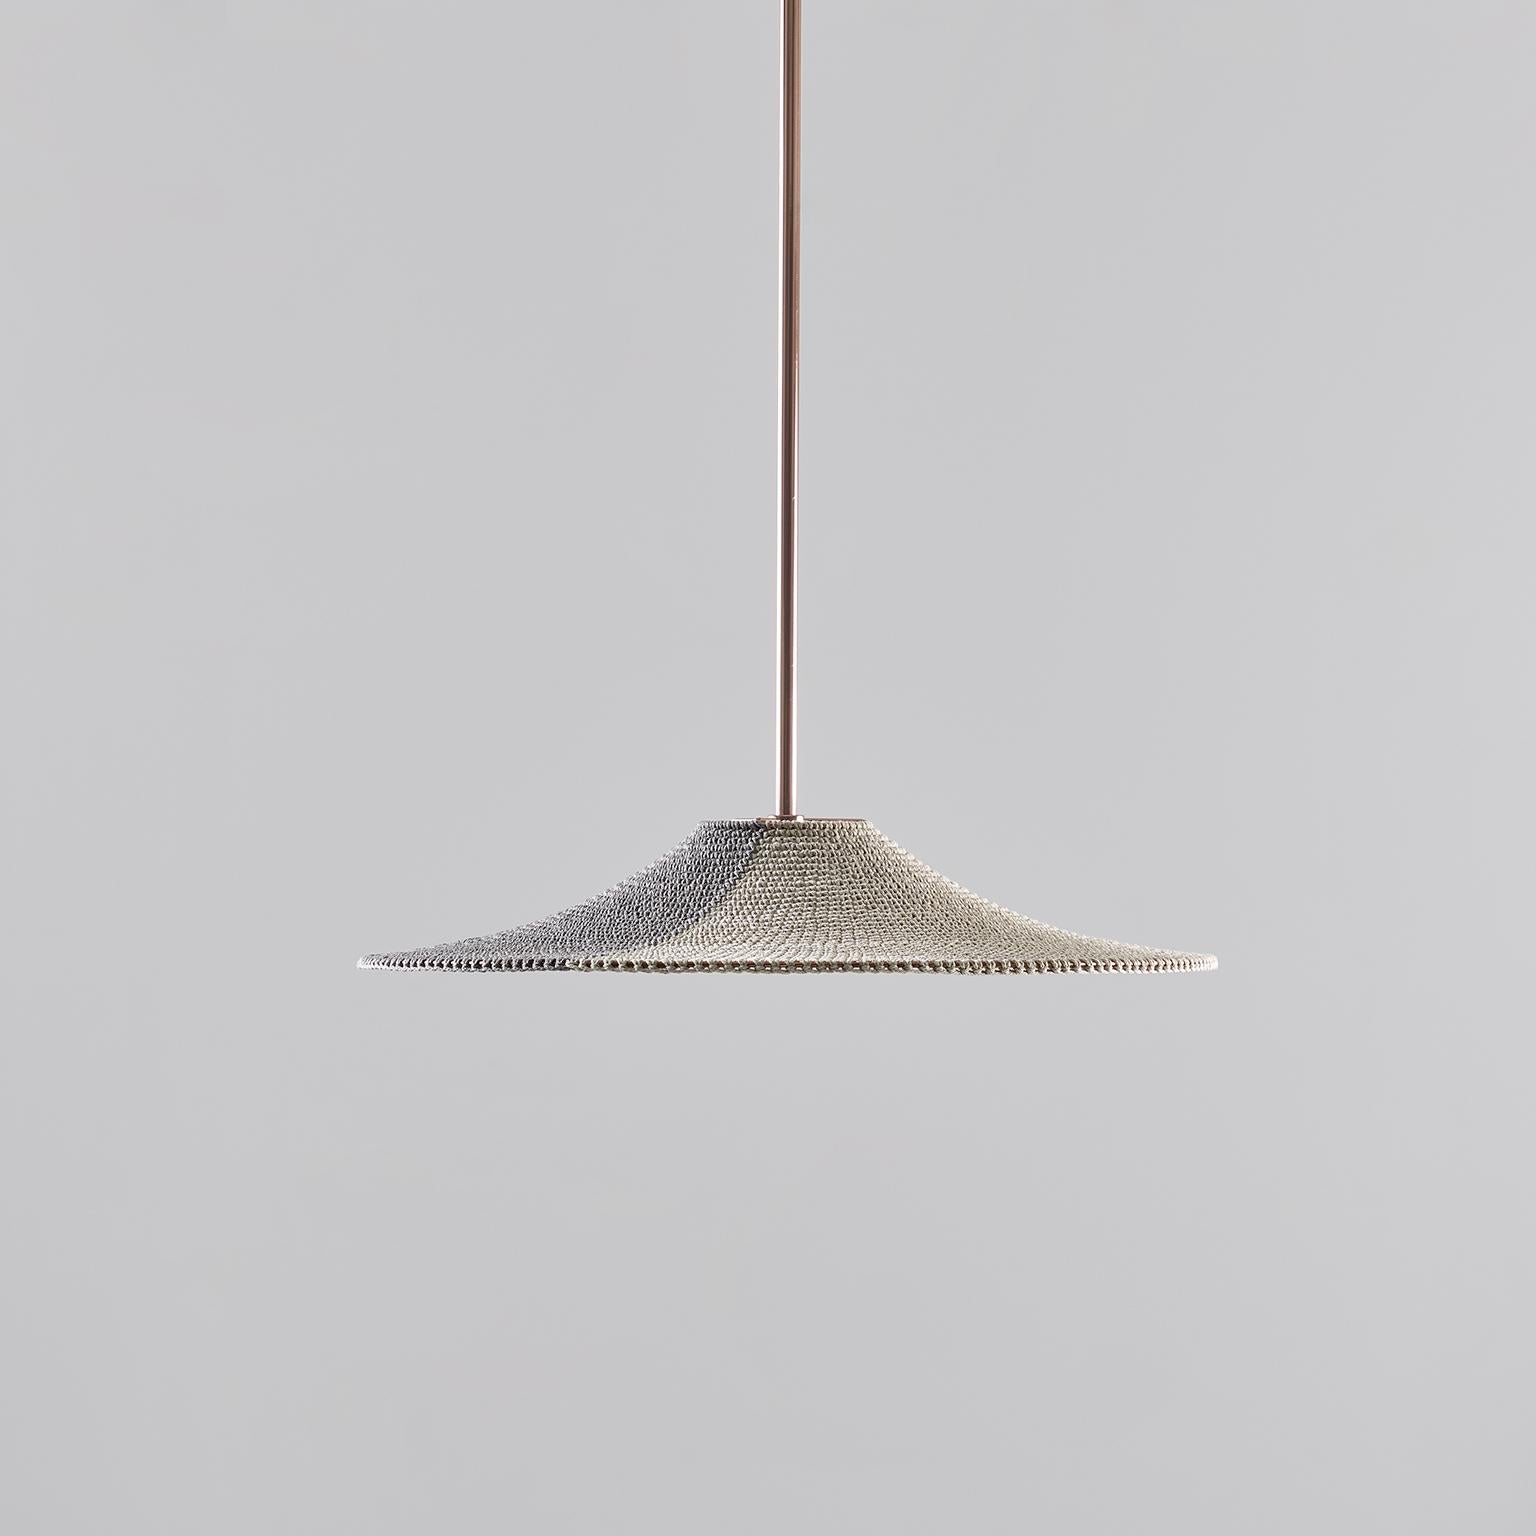 Each Naomi Paul pendant and lighting design is crafted entirely by hand in our London studio to order, by our highly skilled team of makers. 

SS01 makes an elegant centre piece for social spaces and provides a versatile direct overhead light. SS01